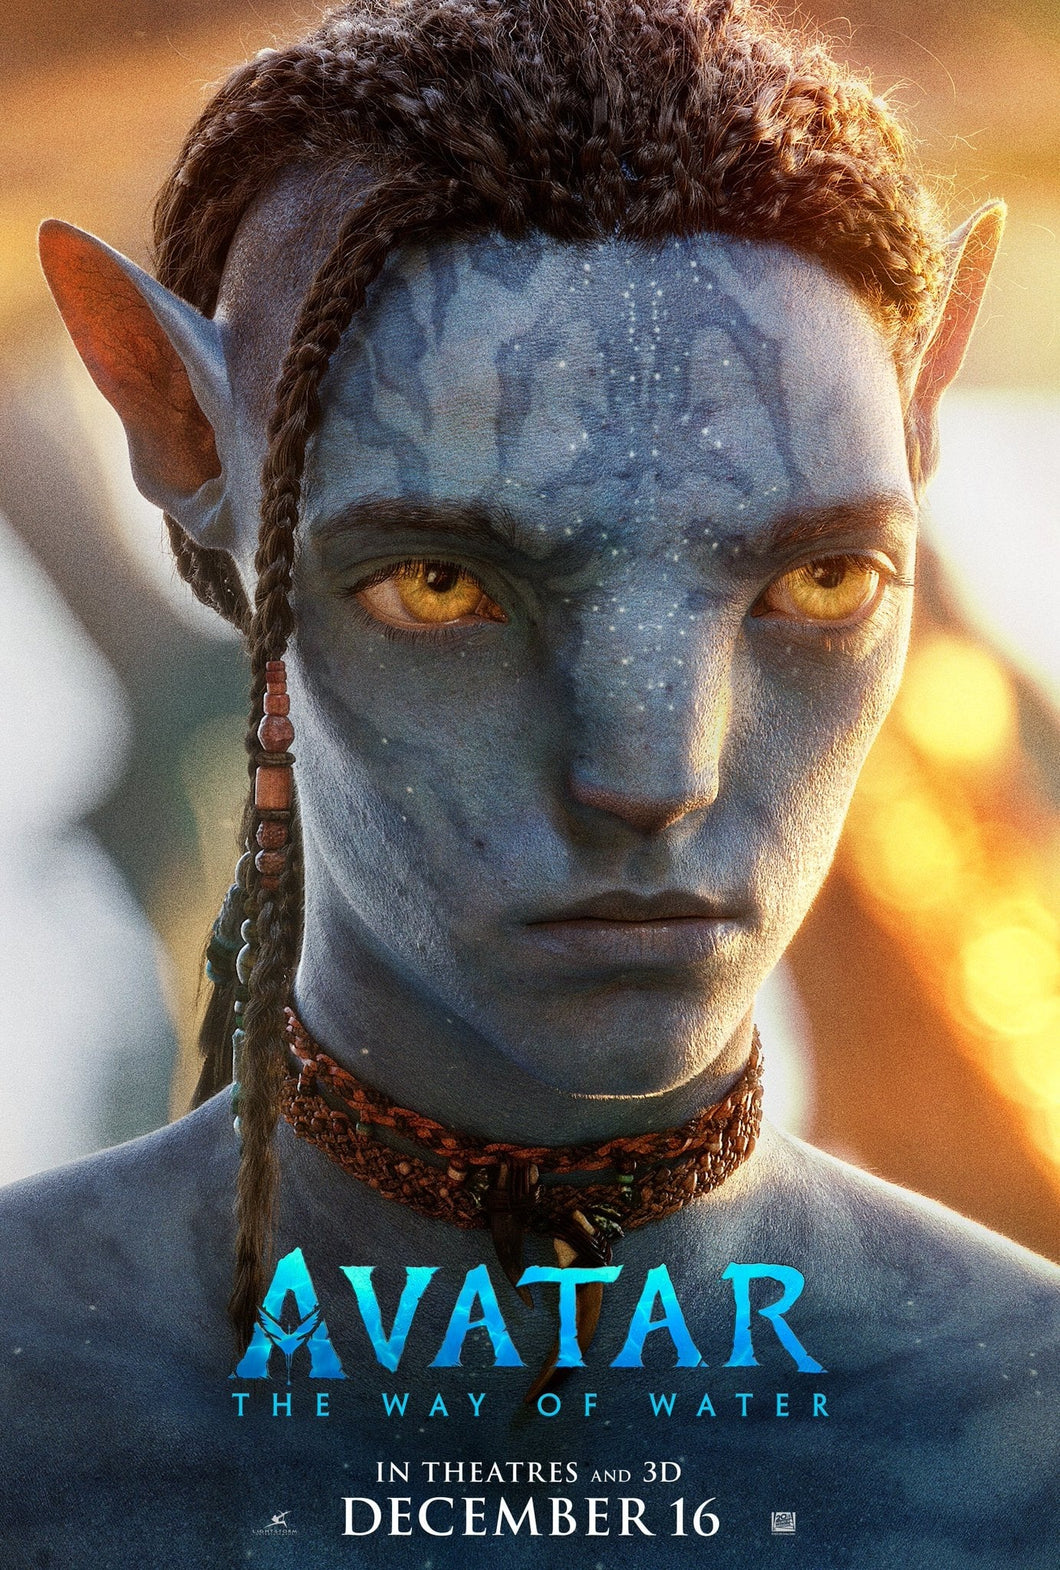 AVATAR French Movie Poster  15x21 in  2009